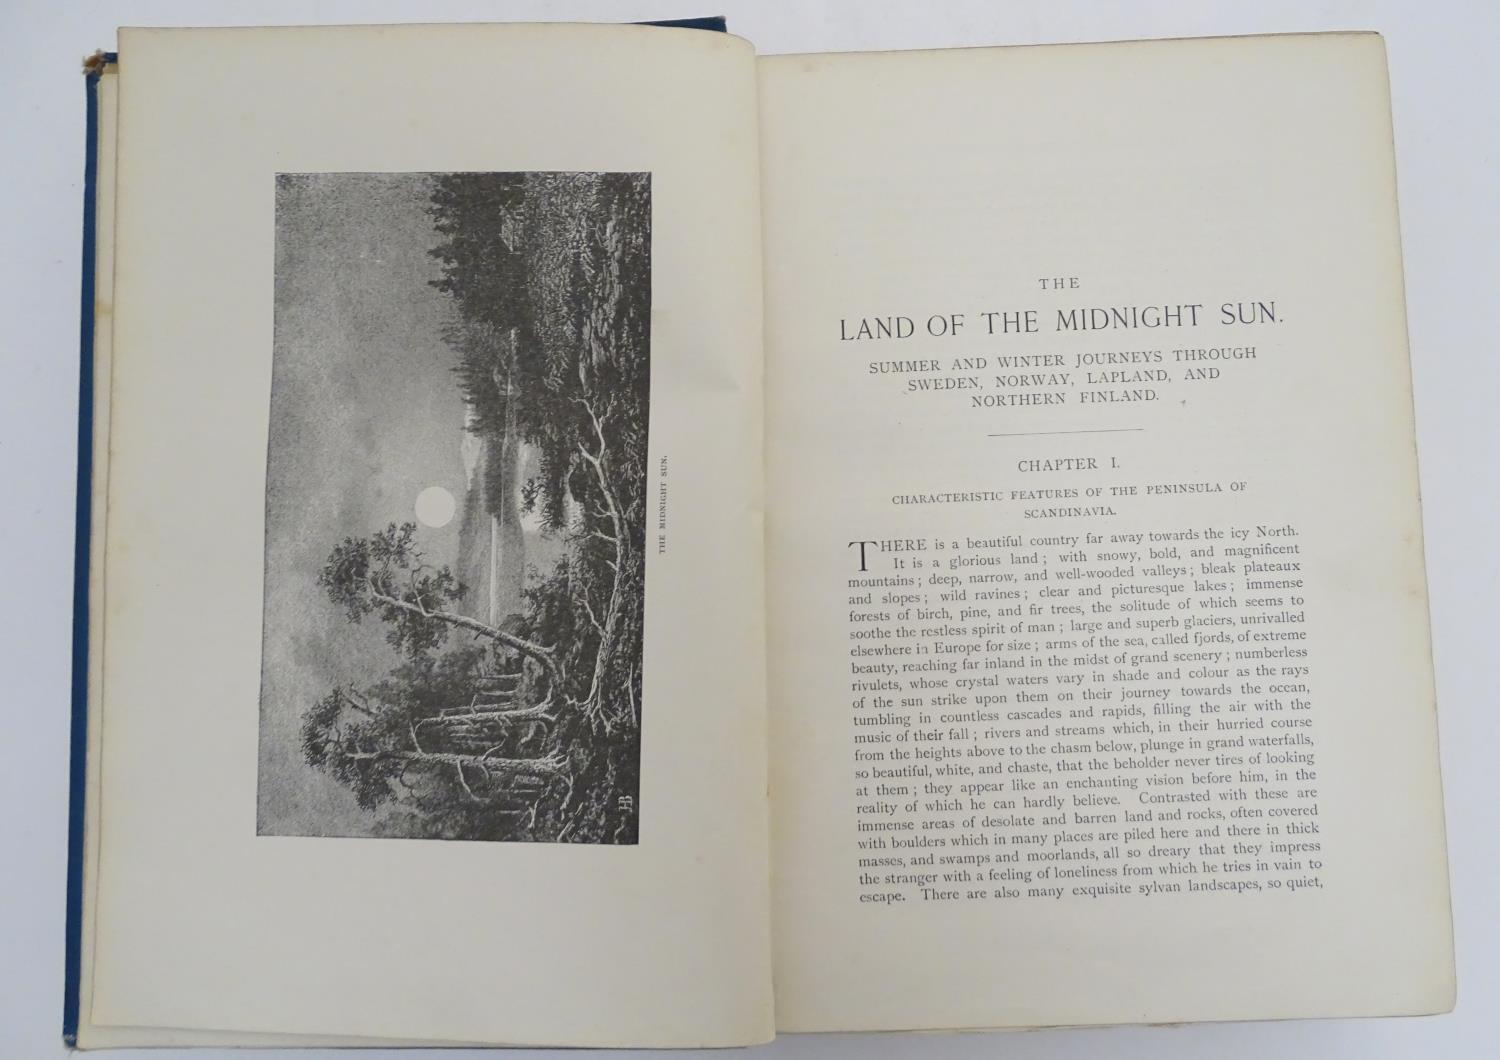 Book: The Land of the Midnight Sun, by Paul Du Chaillu. Published by George Newnes Ltd., 1899 Please - Image 4 of 6